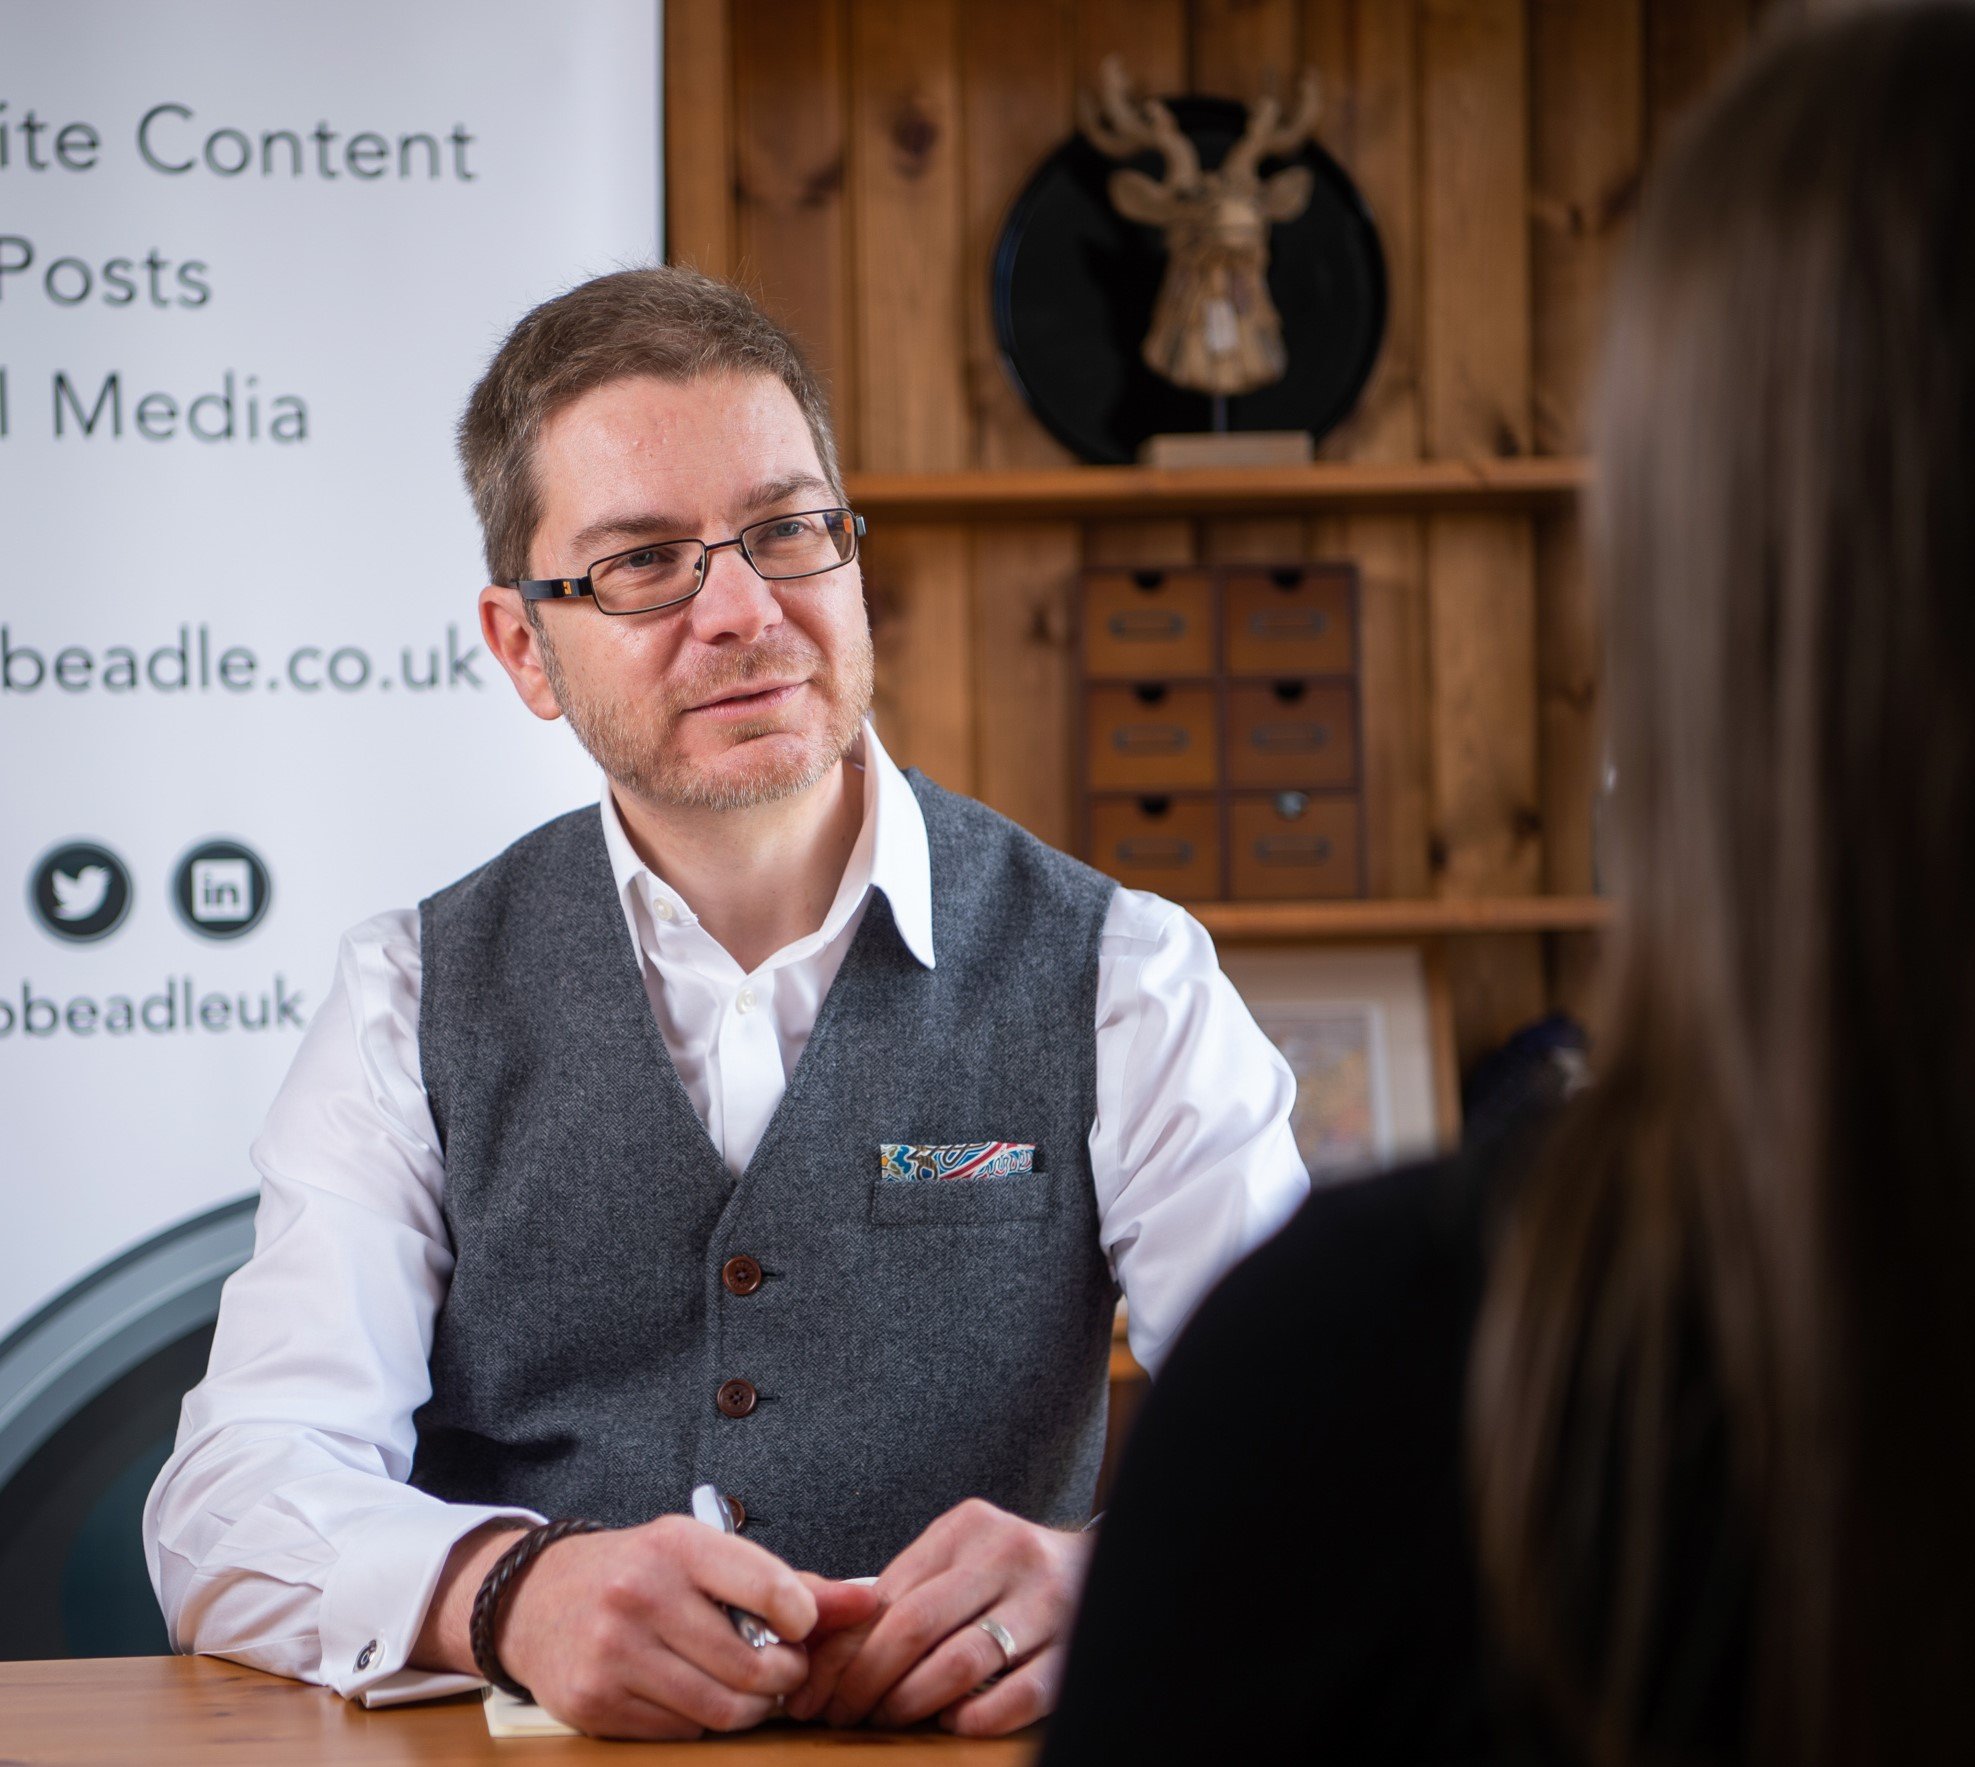 Rob Beadle talking to a client